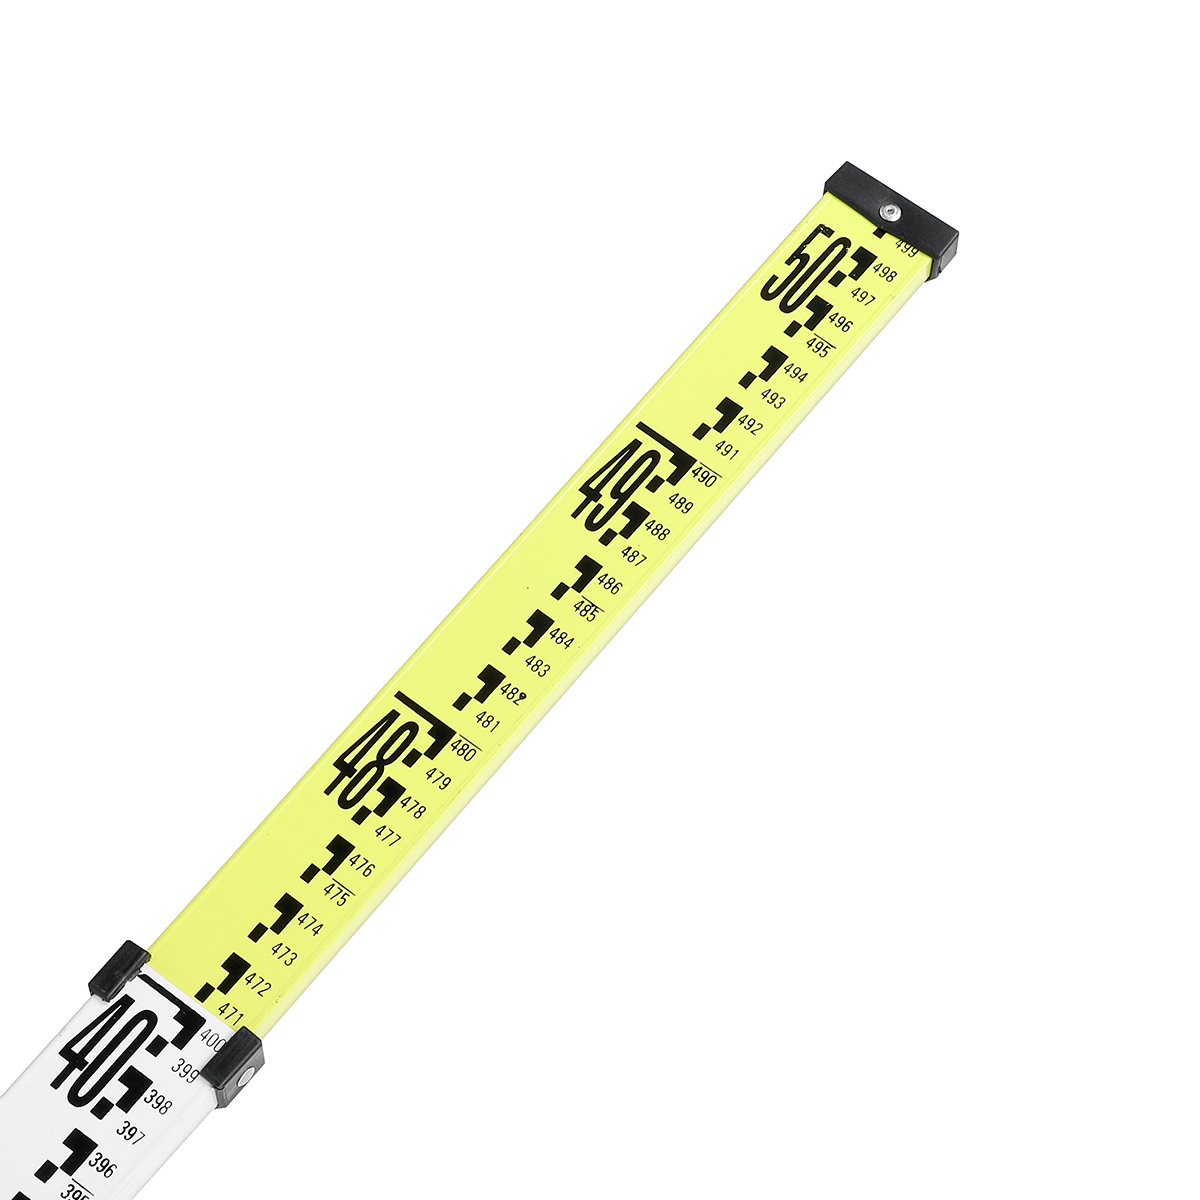 Thickened-Aluminum-Alloy-3-Meters-5-Meters-7-Meters-Tower-Ruler-Ruler-Measuring-Tool-Thickened-Fixed-1895358-7